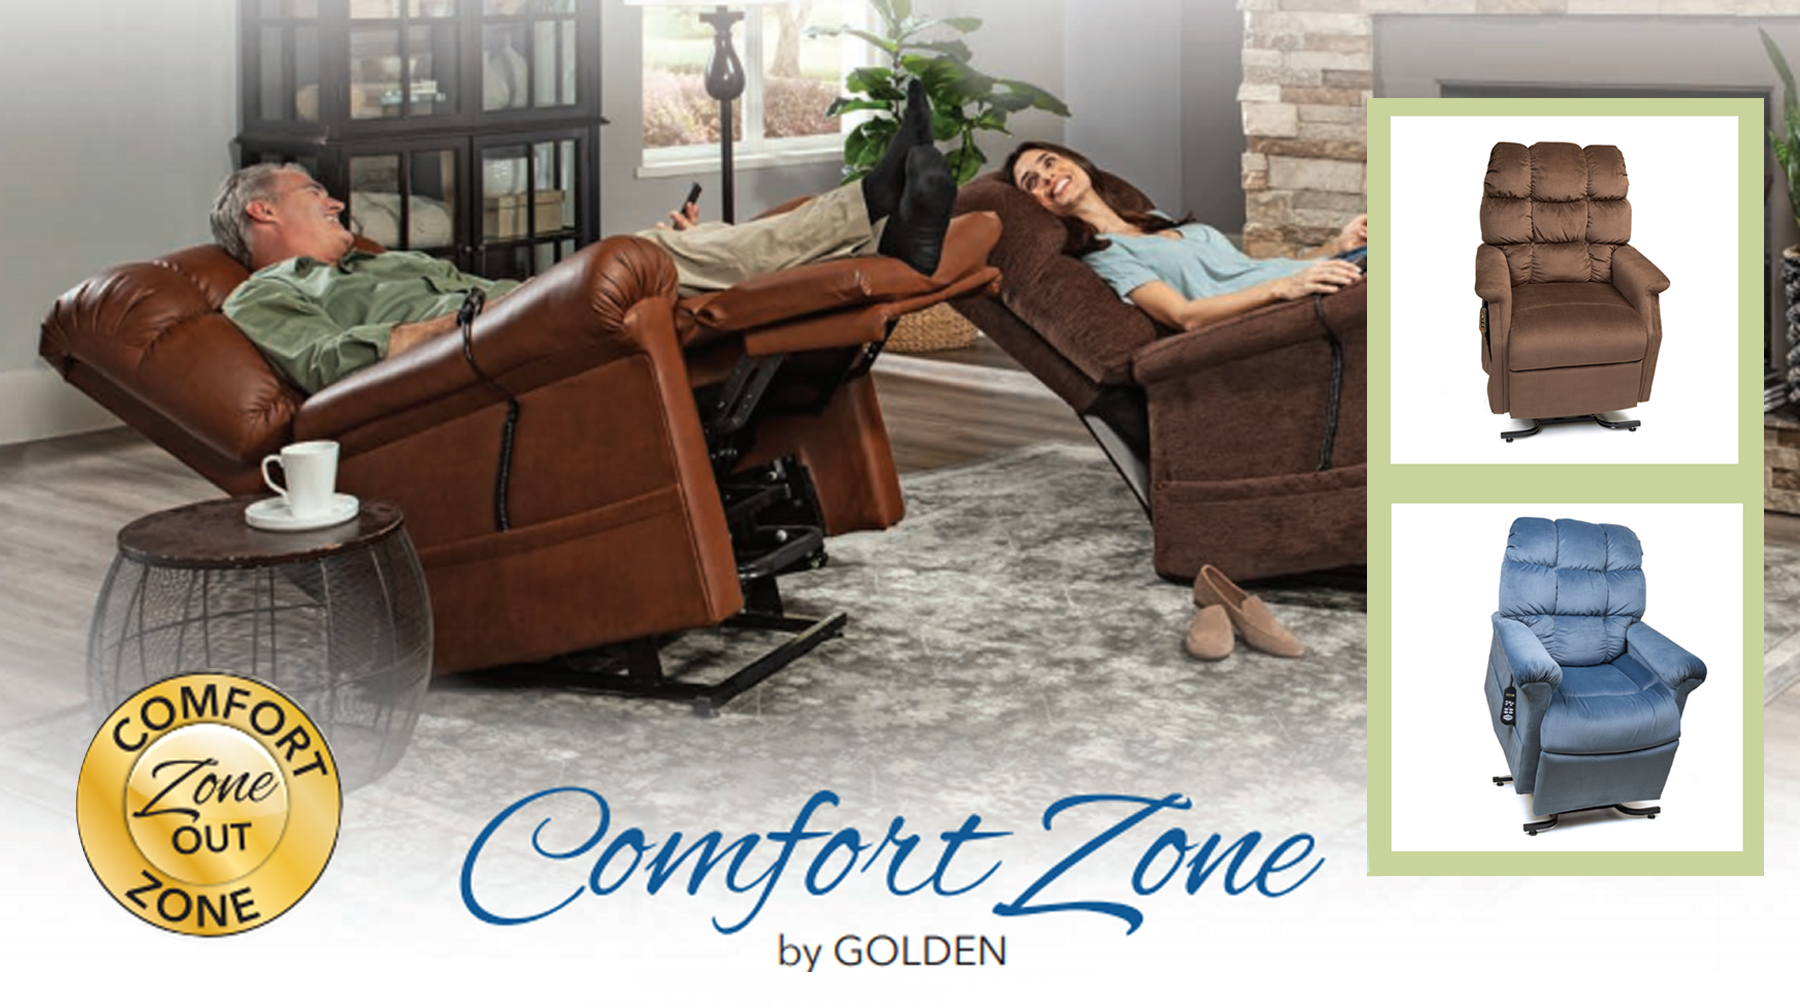 The Place for Your Next Recliner/Lift Chair